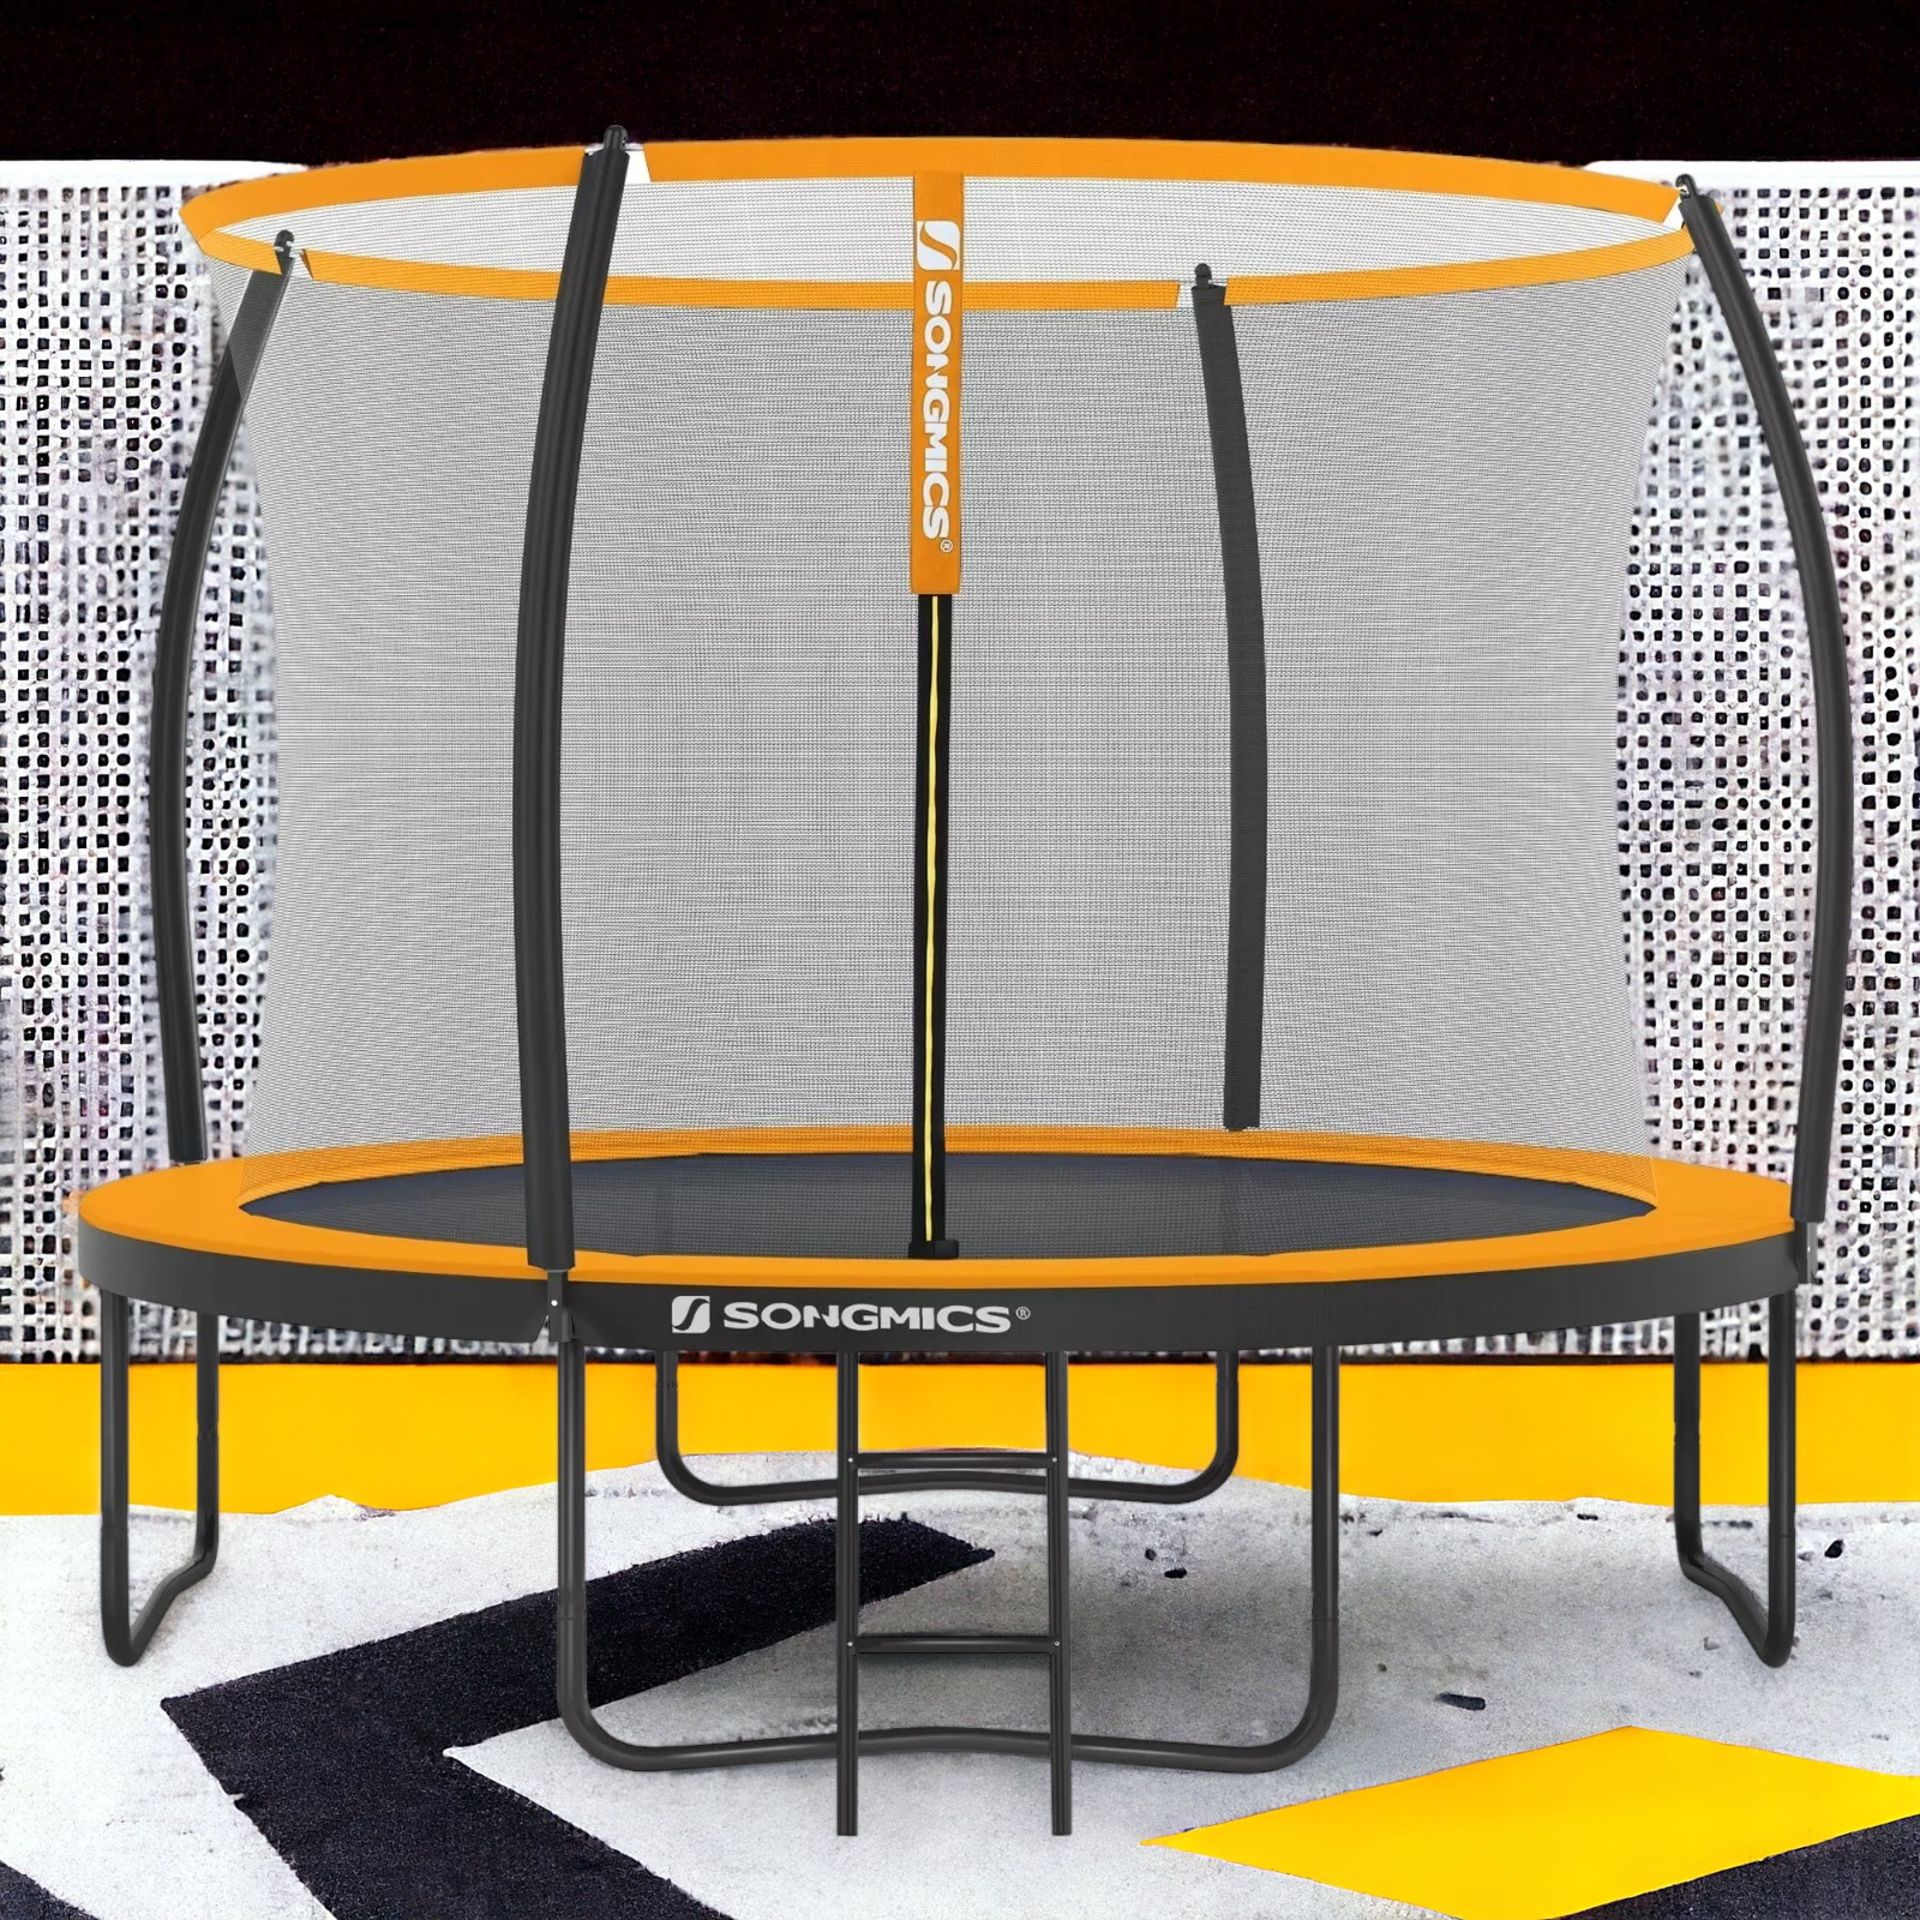 FREE DELIVERY - BRAND NEW TRAMPOLINE 12FT ROUND TRAMPOLINE WITH SAFETY NET ENCLOSURE